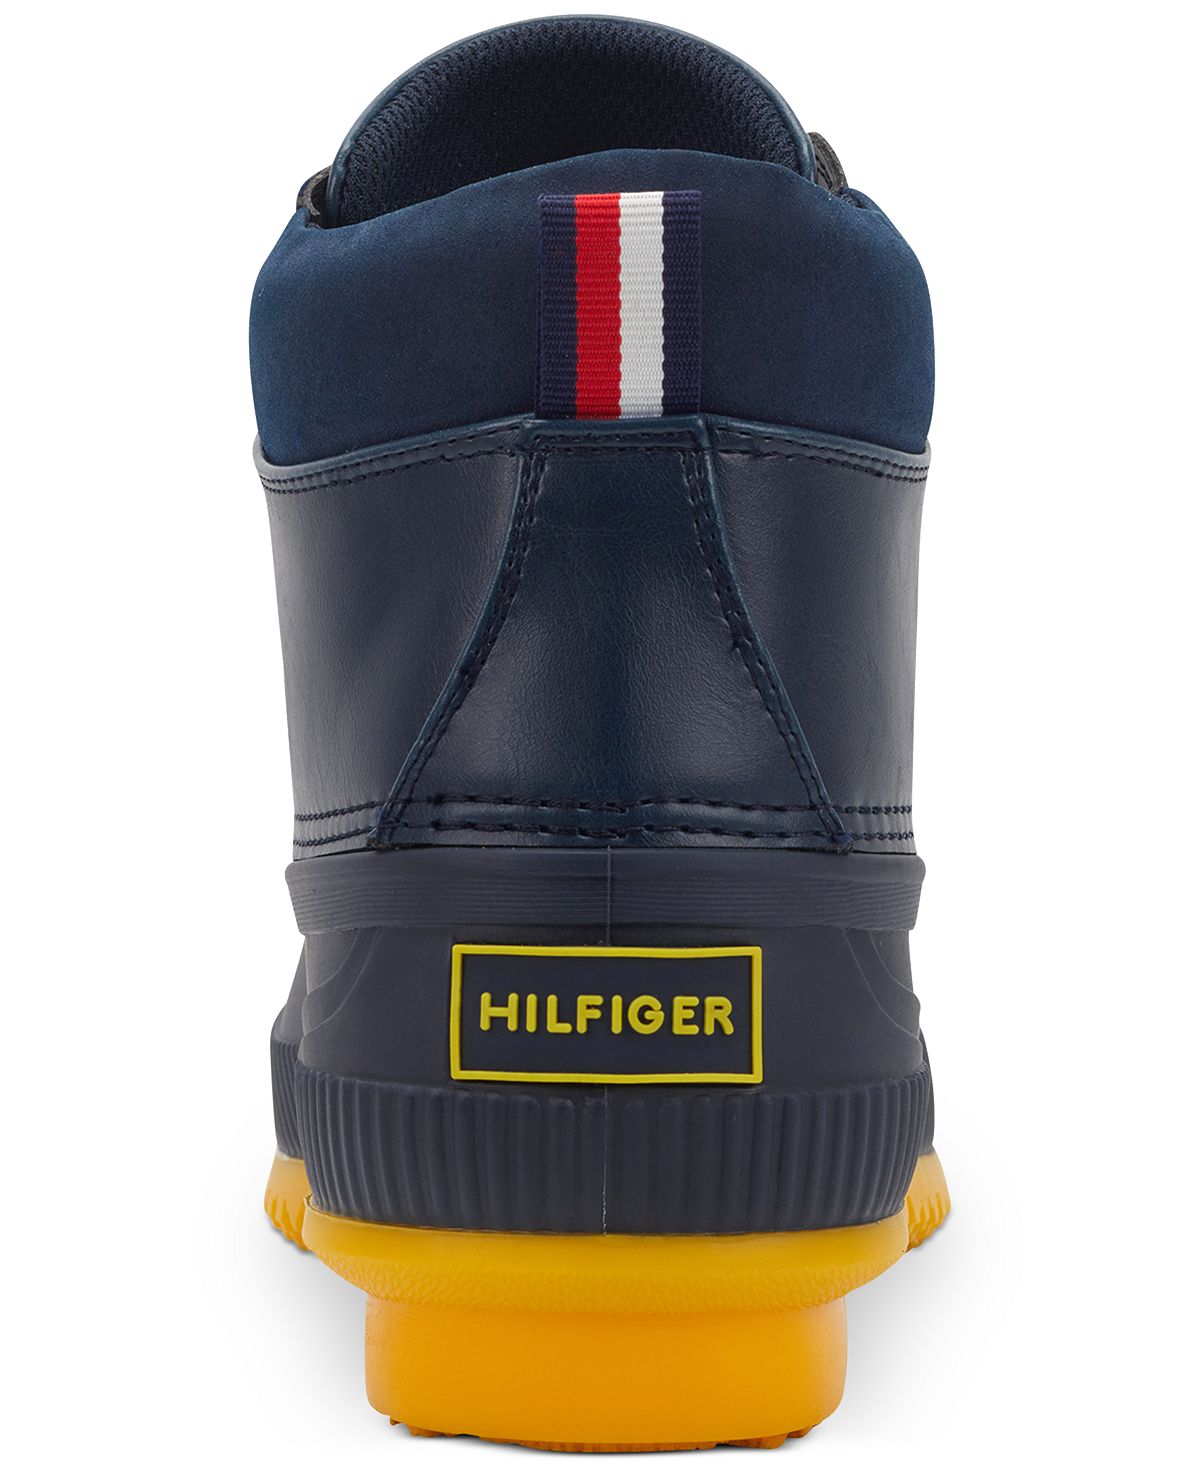 Tommy Hilfiger Celcius Duck Boots Navy Yellow